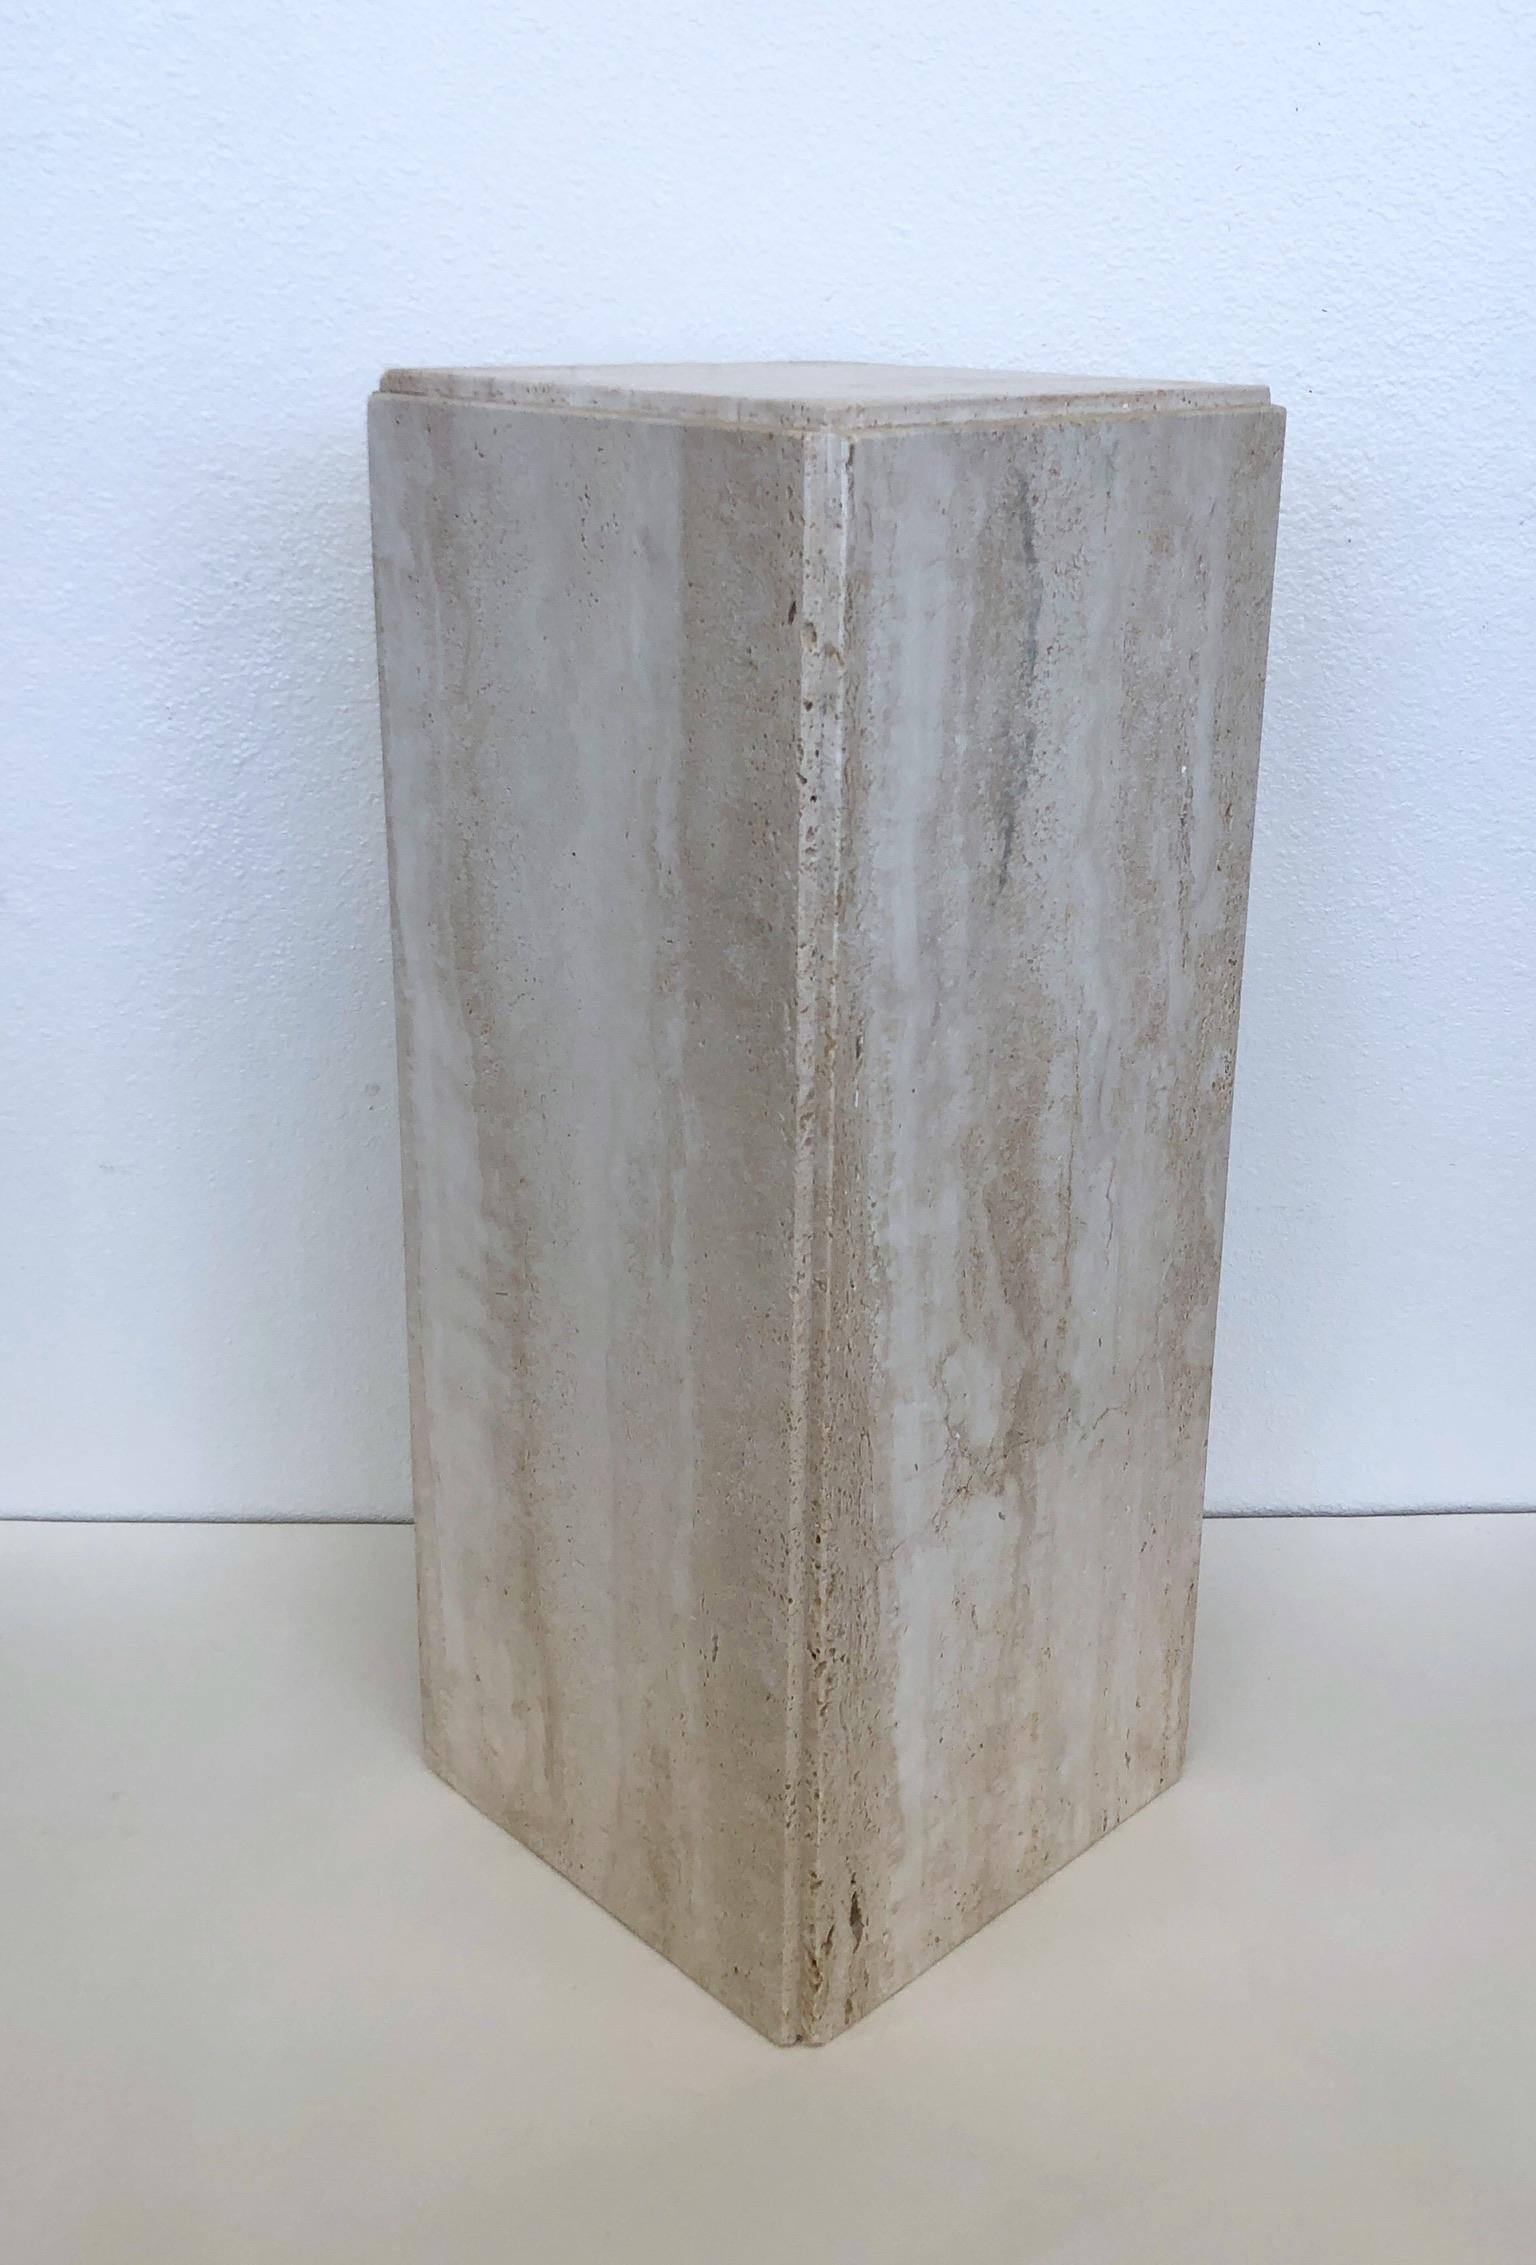 1970’s Italian travertine pedestal.
In original condition, this is not polished. 
Measurements: 10.5” Wide, 10.5” Deep, 25.5” High.